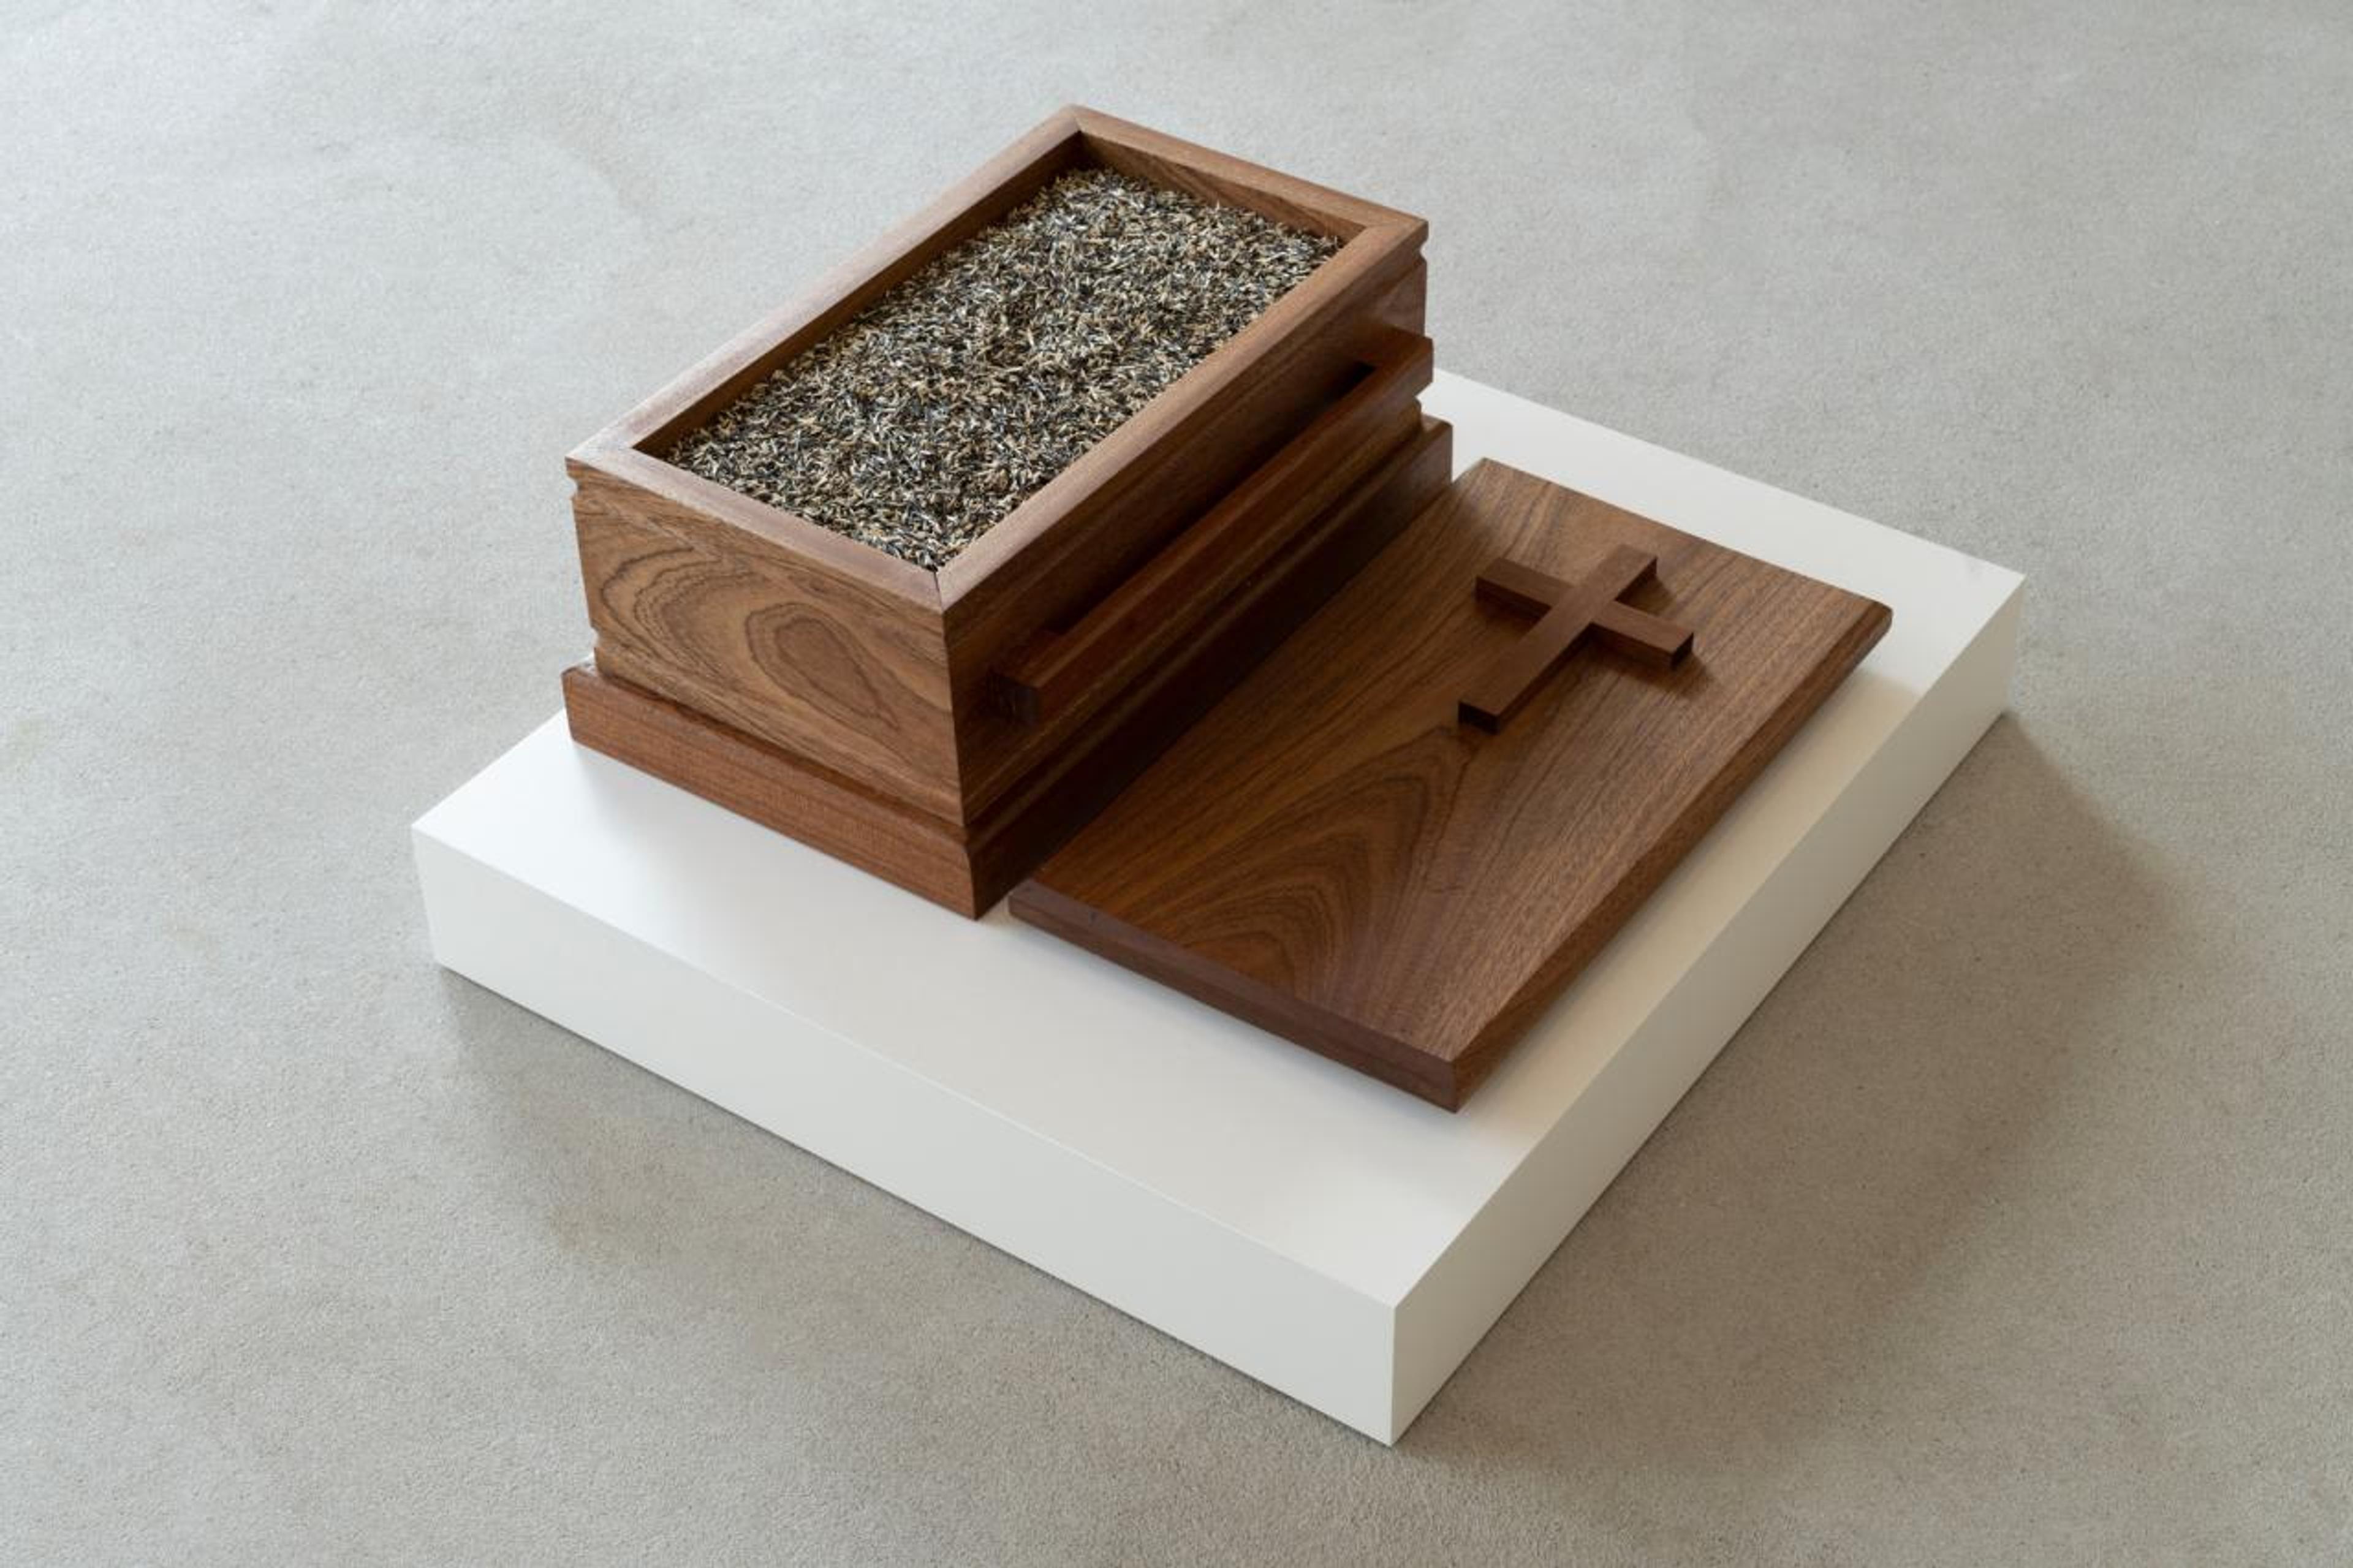 Rhea Dillon, Incomprehensible Sex Coming To Its Dreaded Fruition; nothing remains but Pecola & the Unyielding Earth, 2023, sapele mahogany and marigold seeds, 22.5 x 38 x 19 cm